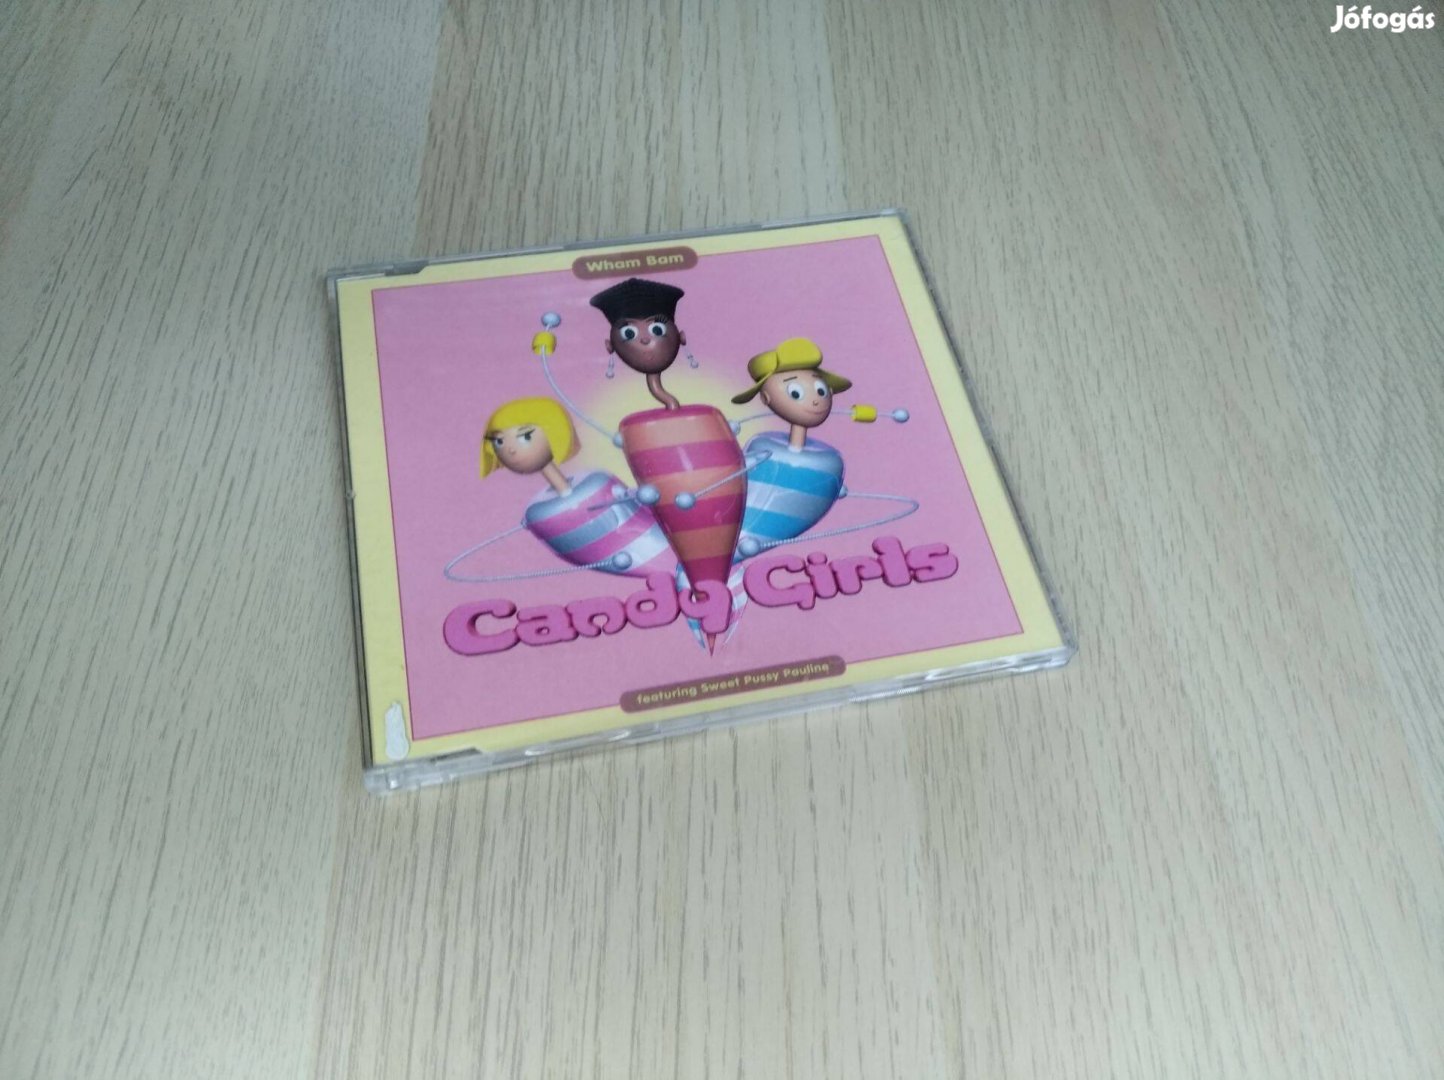 Candy Girls Featuring Sweet Pussy Pauline - Wham Bam / Maxi CD 1996